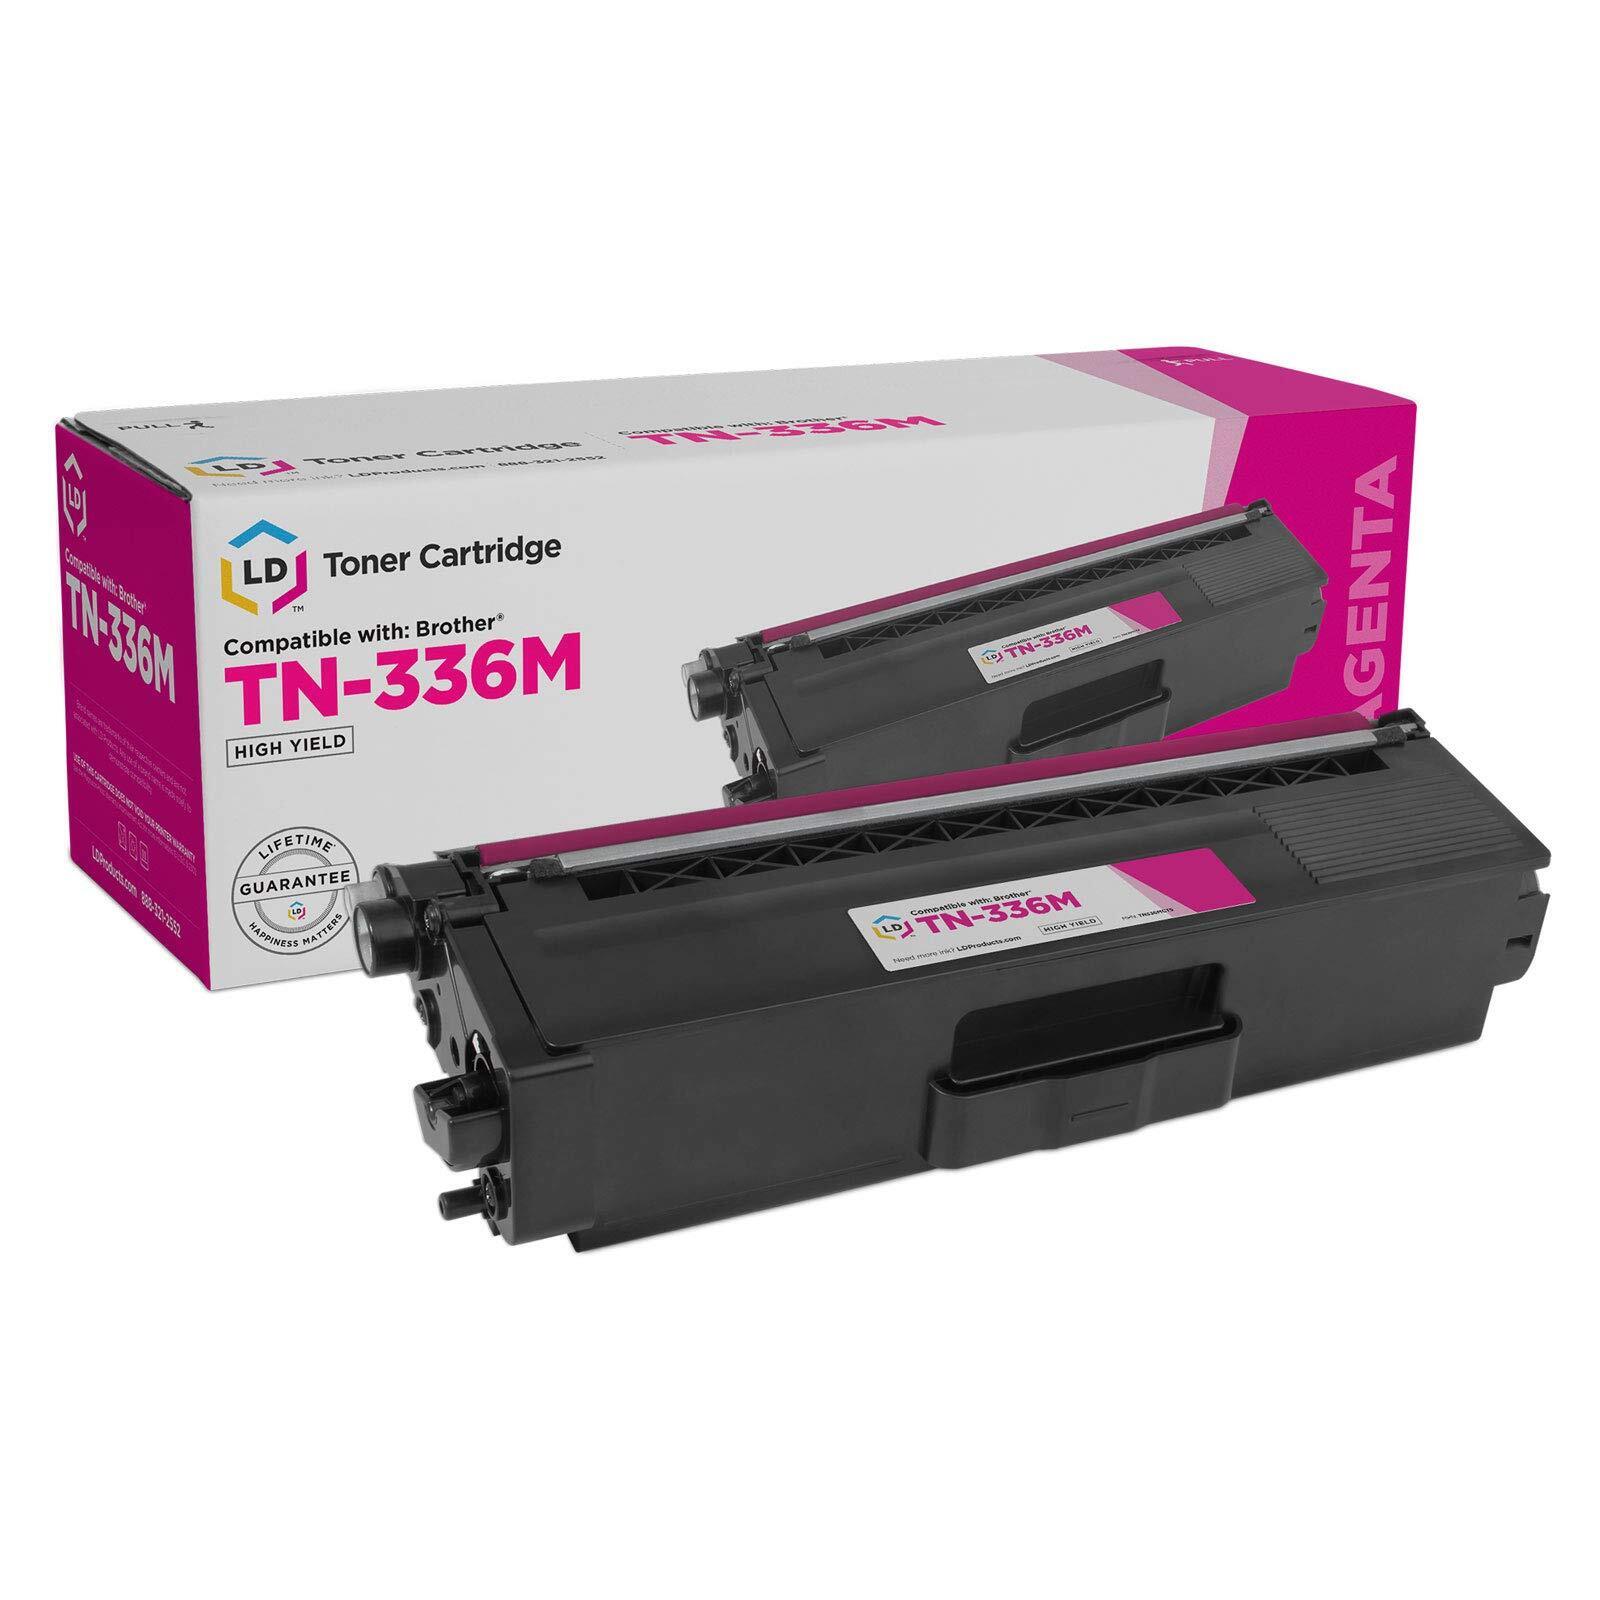 Compatible Toner Cartridge Replacement for Brother TN336M High Yield (Magenta)